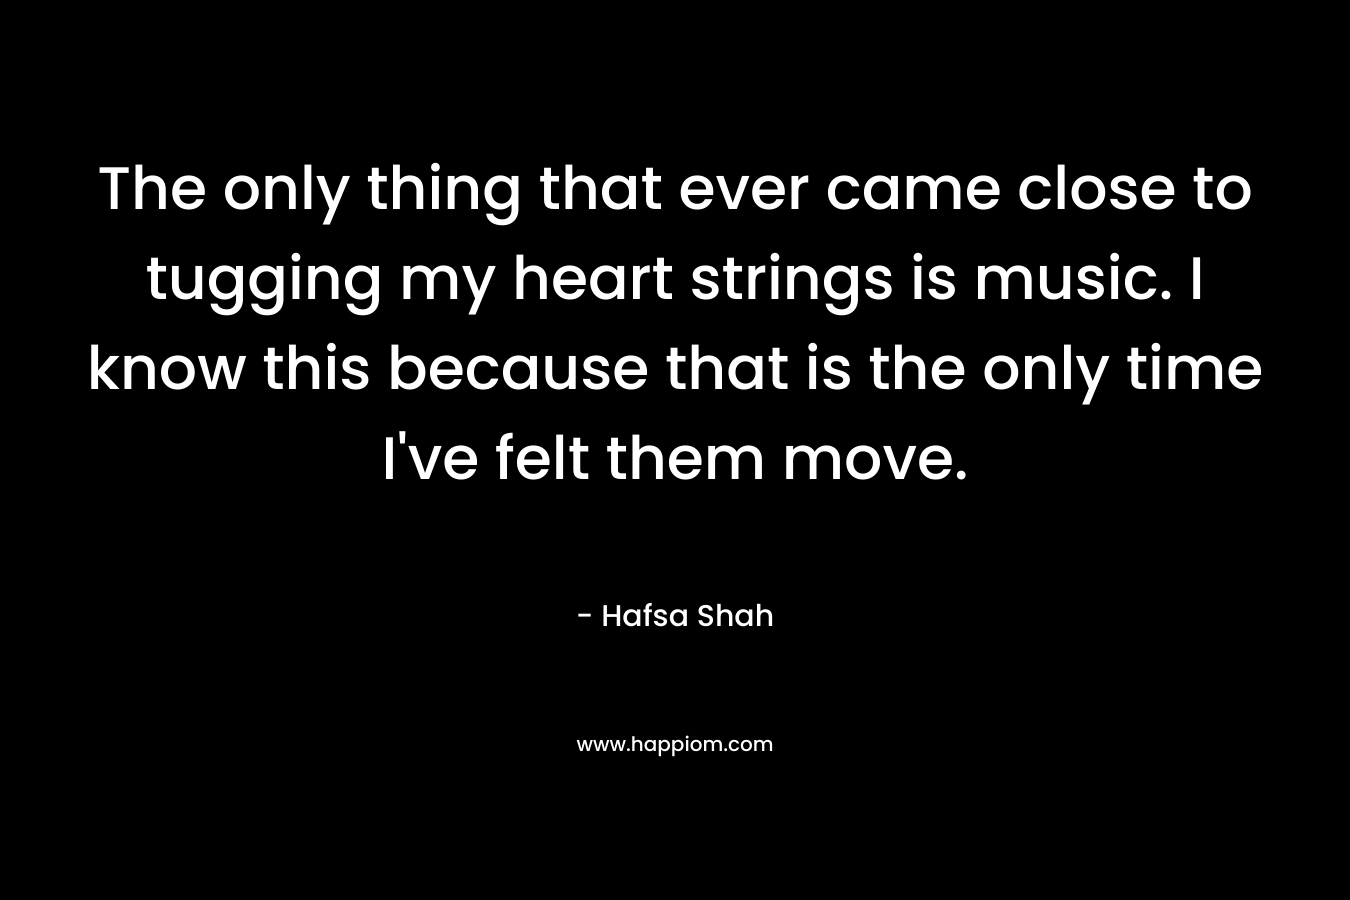 The only thing that ever came close to tugging my heart strings is music. I know this because that is the only time I’ve felt them move. – Hafsa Shah